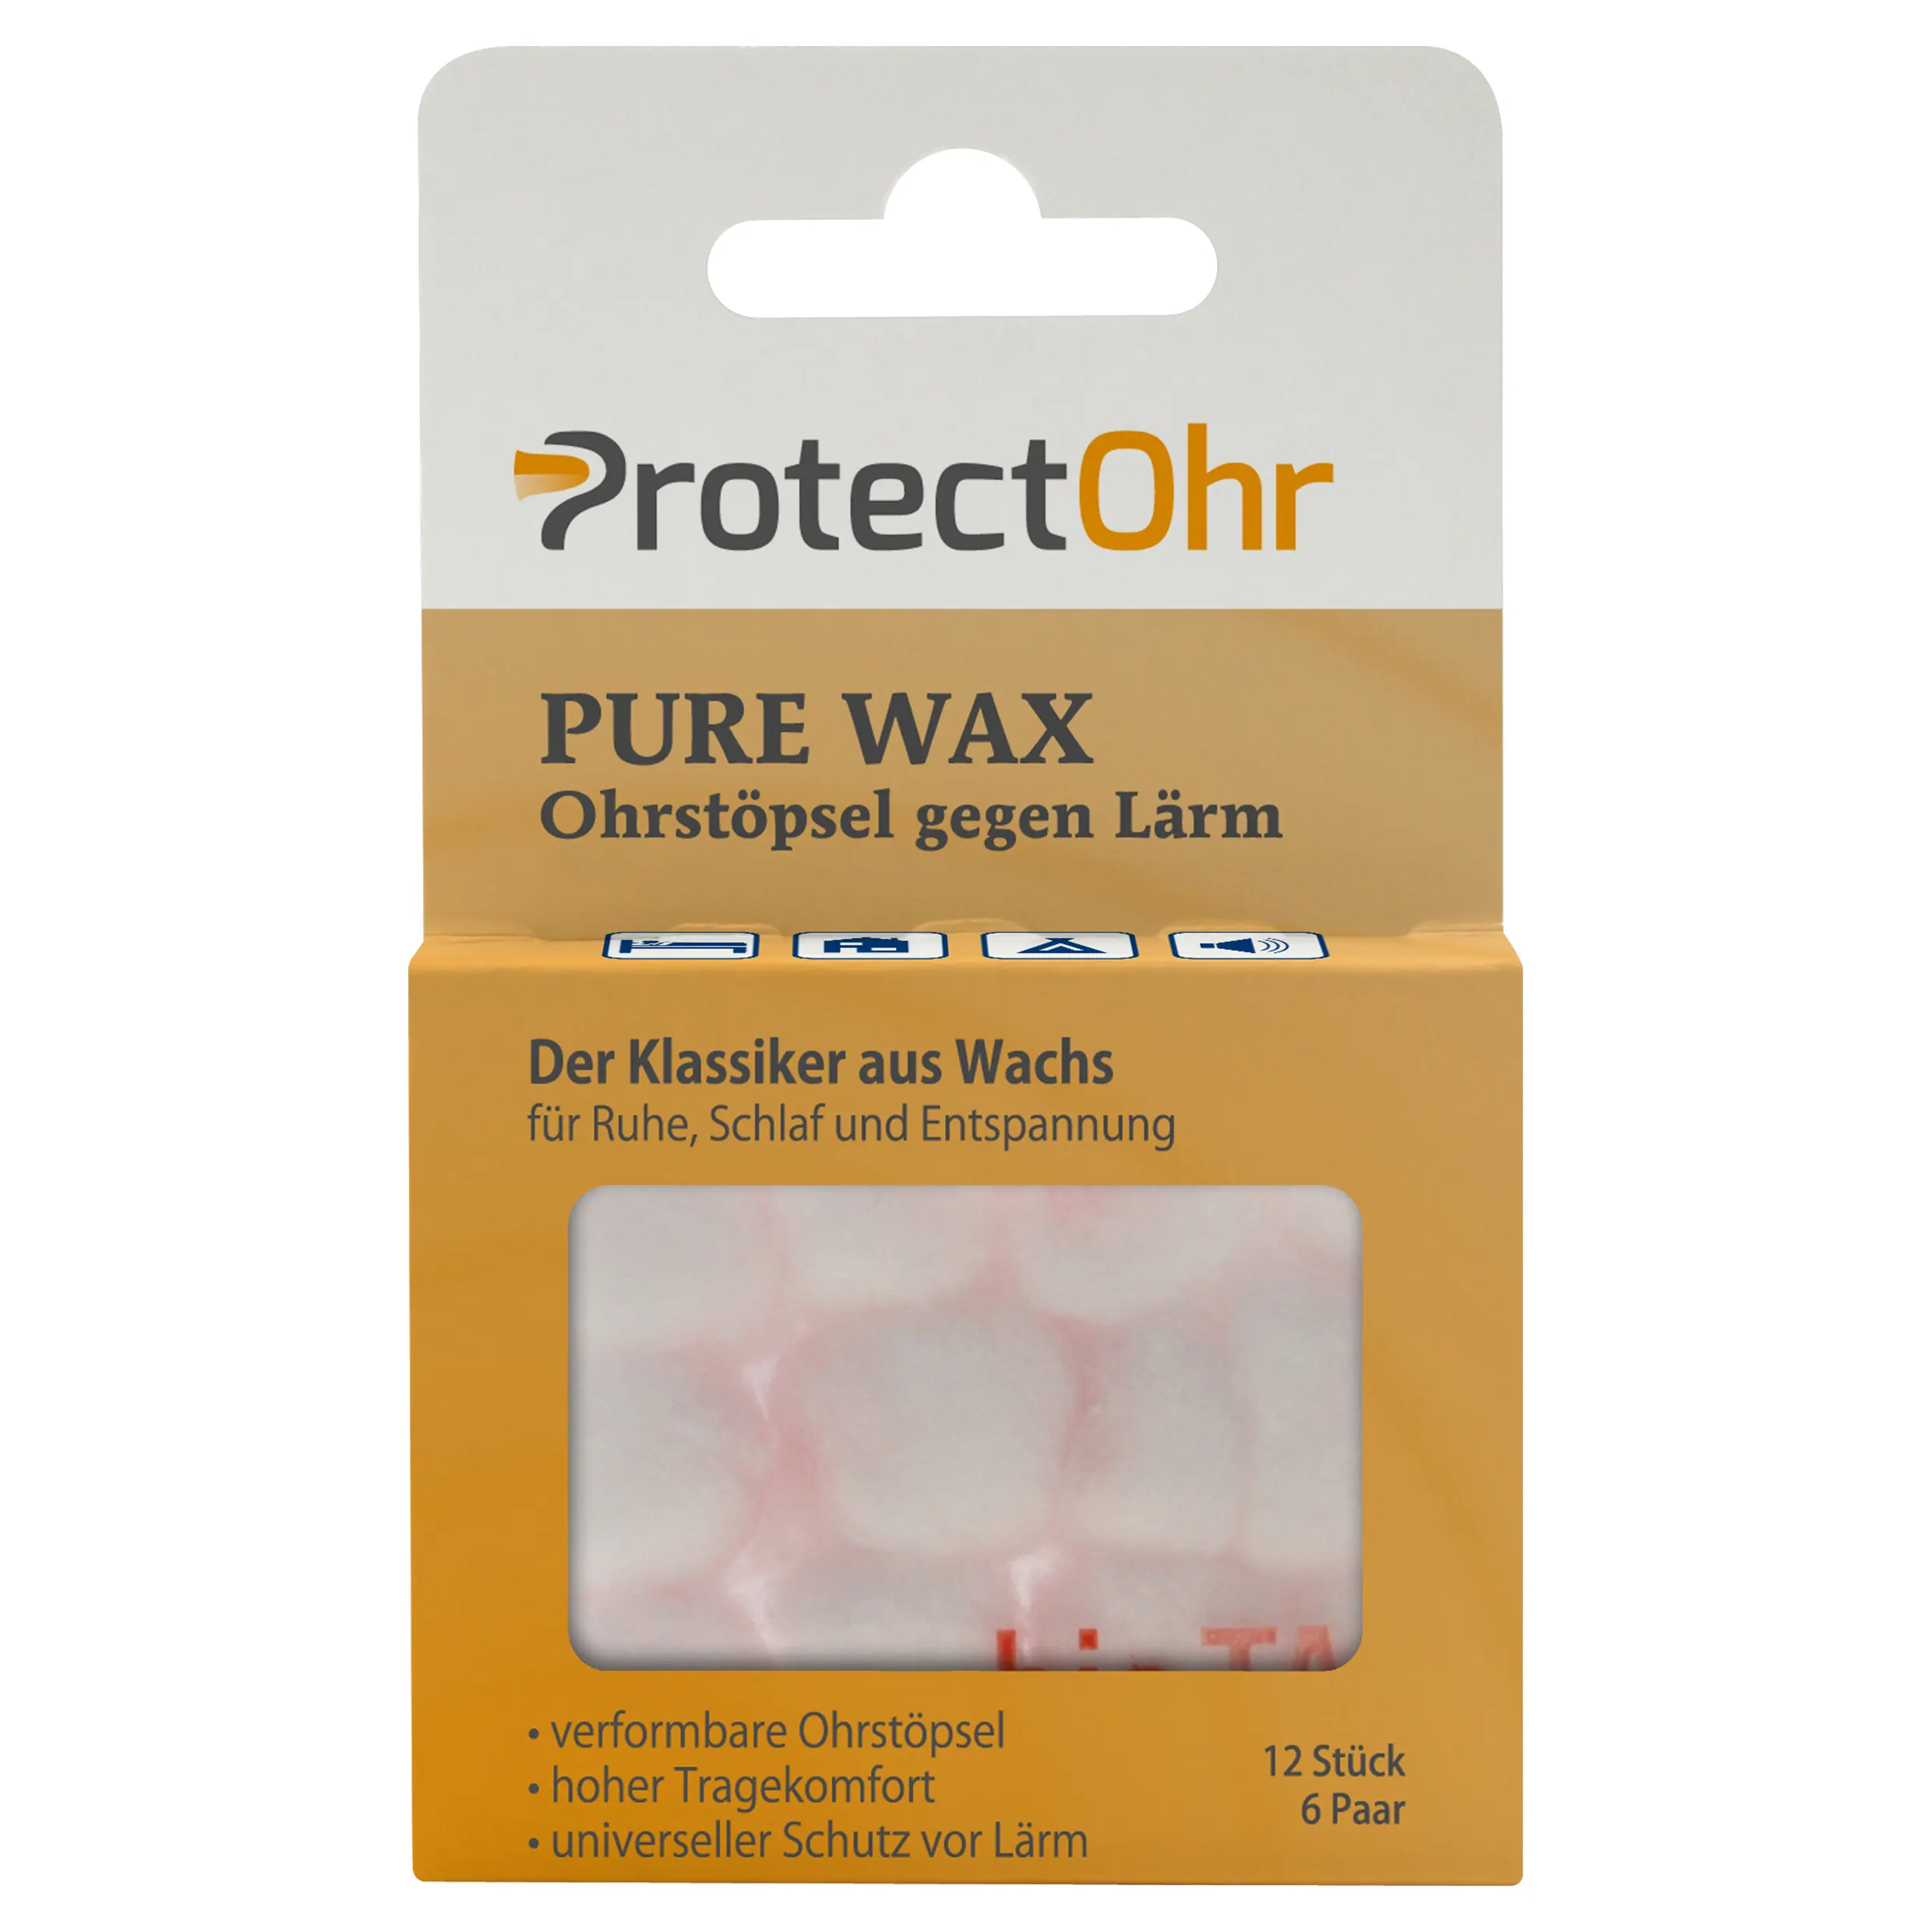 ProtectOhr Pure Wax